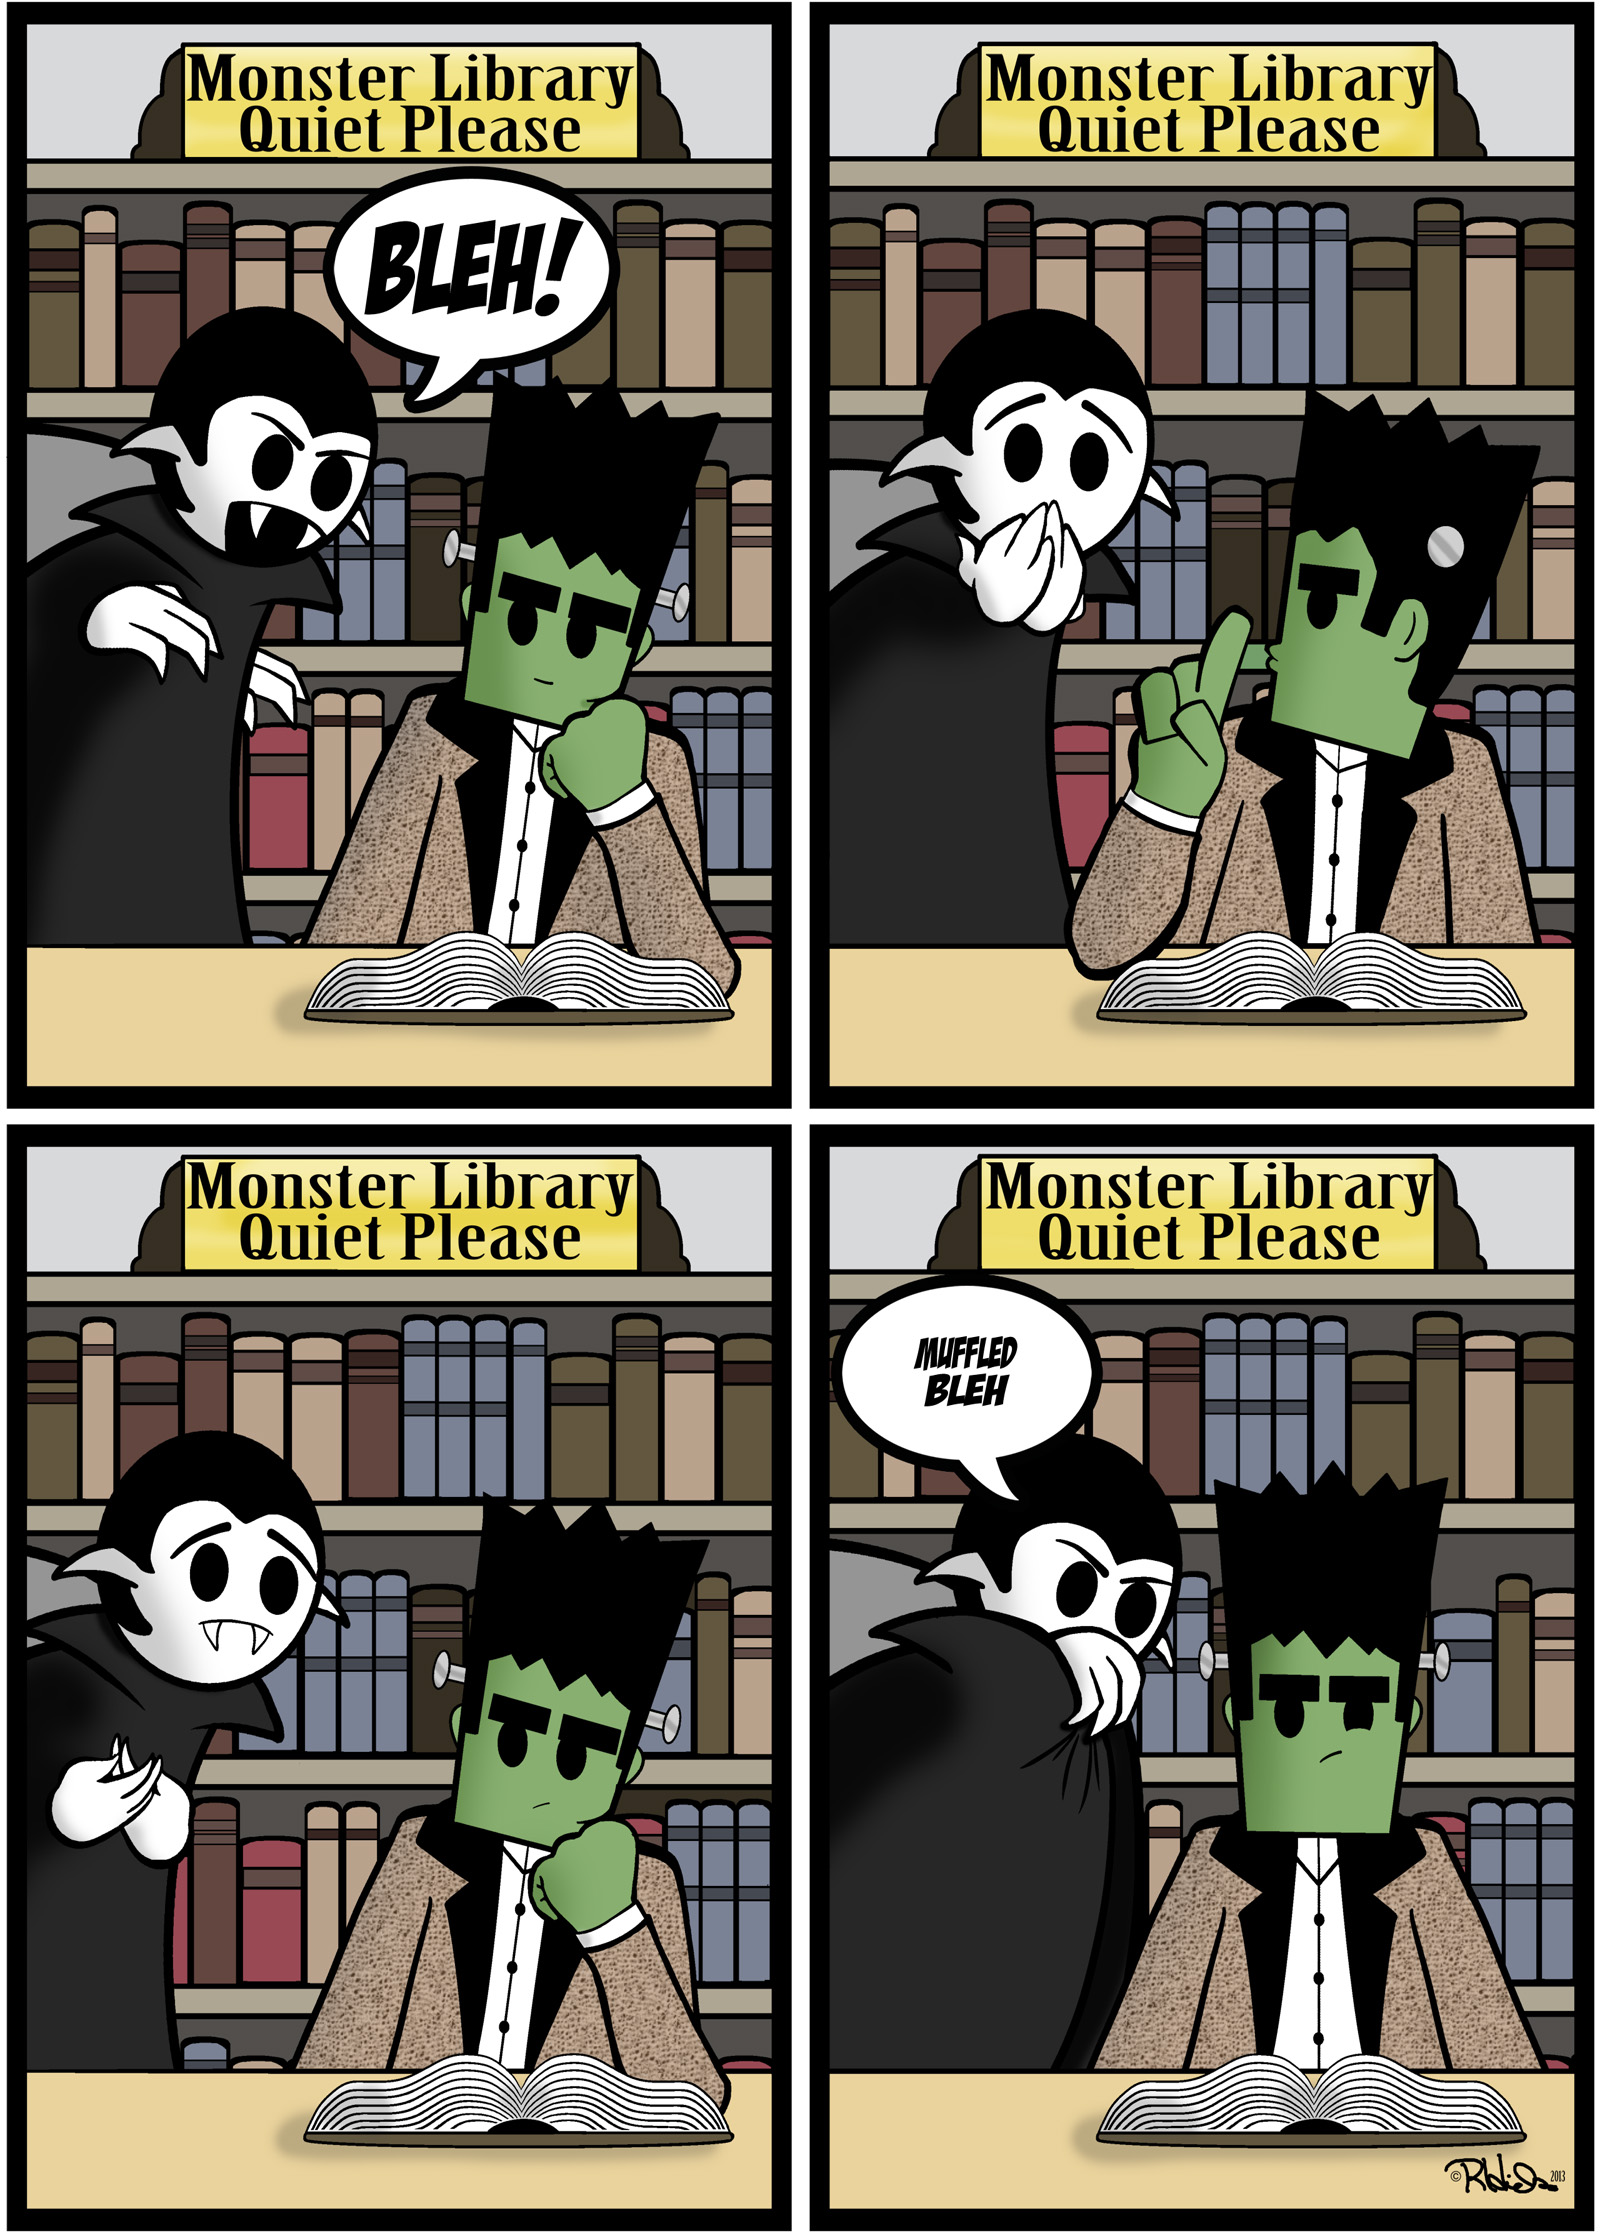 Frank reads a book in the library under a “Quiet Please” sign. A Little Vampire approaches and exclaims “BLEH!” Frank indicates the sign, and the Little Vampire becomes sheepish and apologetic before putting his cload over his face and whispering “MUFFLED BLEH.